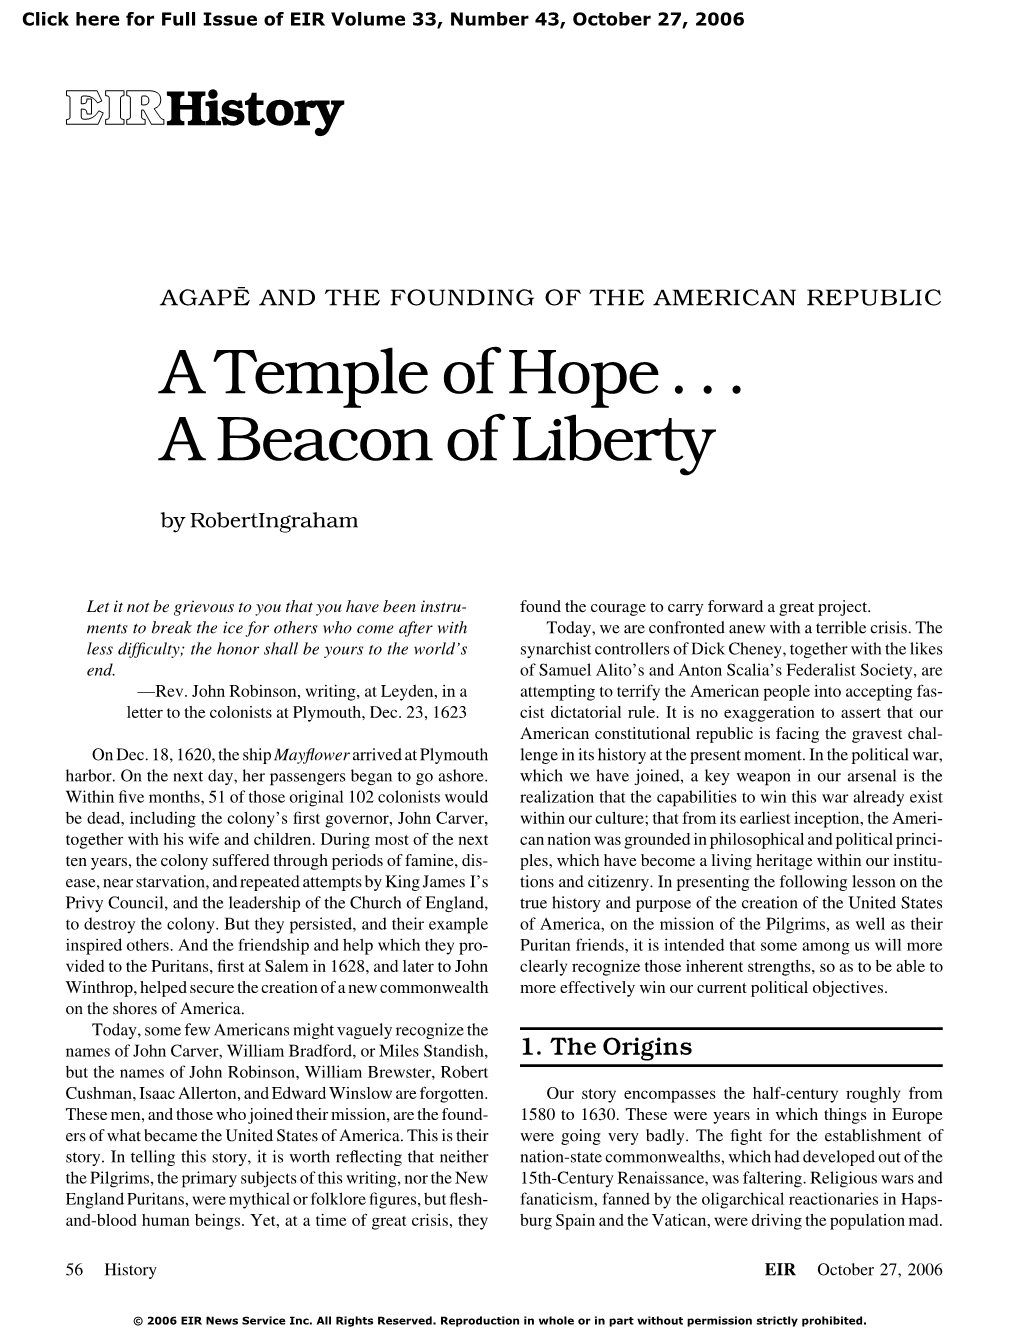 Agapē and the Founding of the American Republic: a Temple of Hope ... a Beacon of Liberty